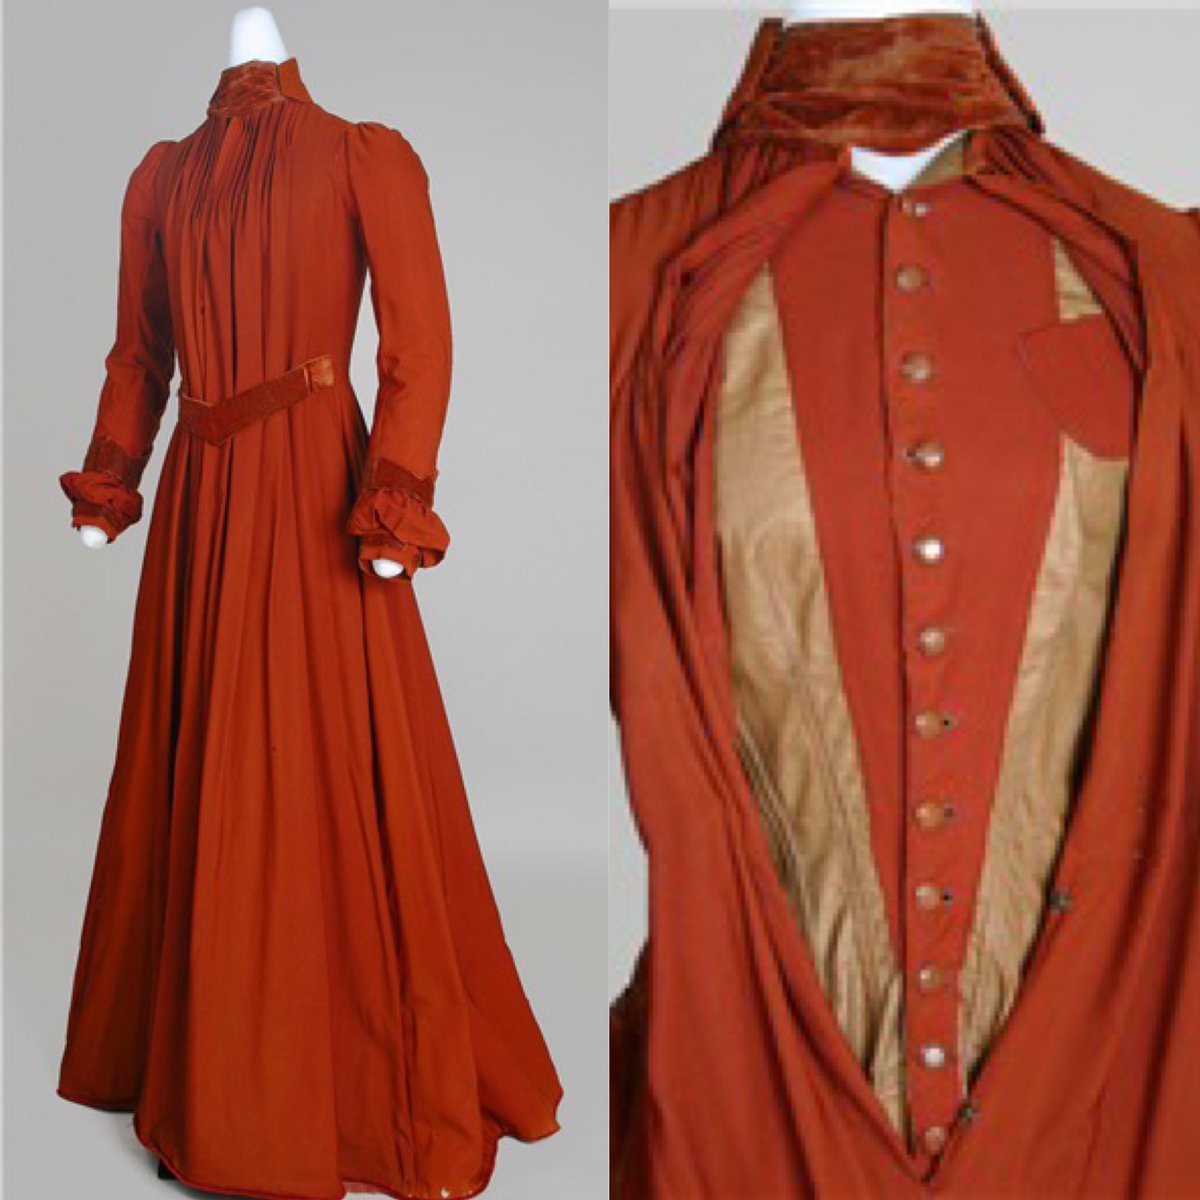 Do not be fooled by the apparent looseness of fit and flow presented by the outward appearance of this #1880s aesthetic gown. Peep within and there is a close fitting under bodice shaping the waist and helping to construct the silhouette #wisconsinhistoricalsociety